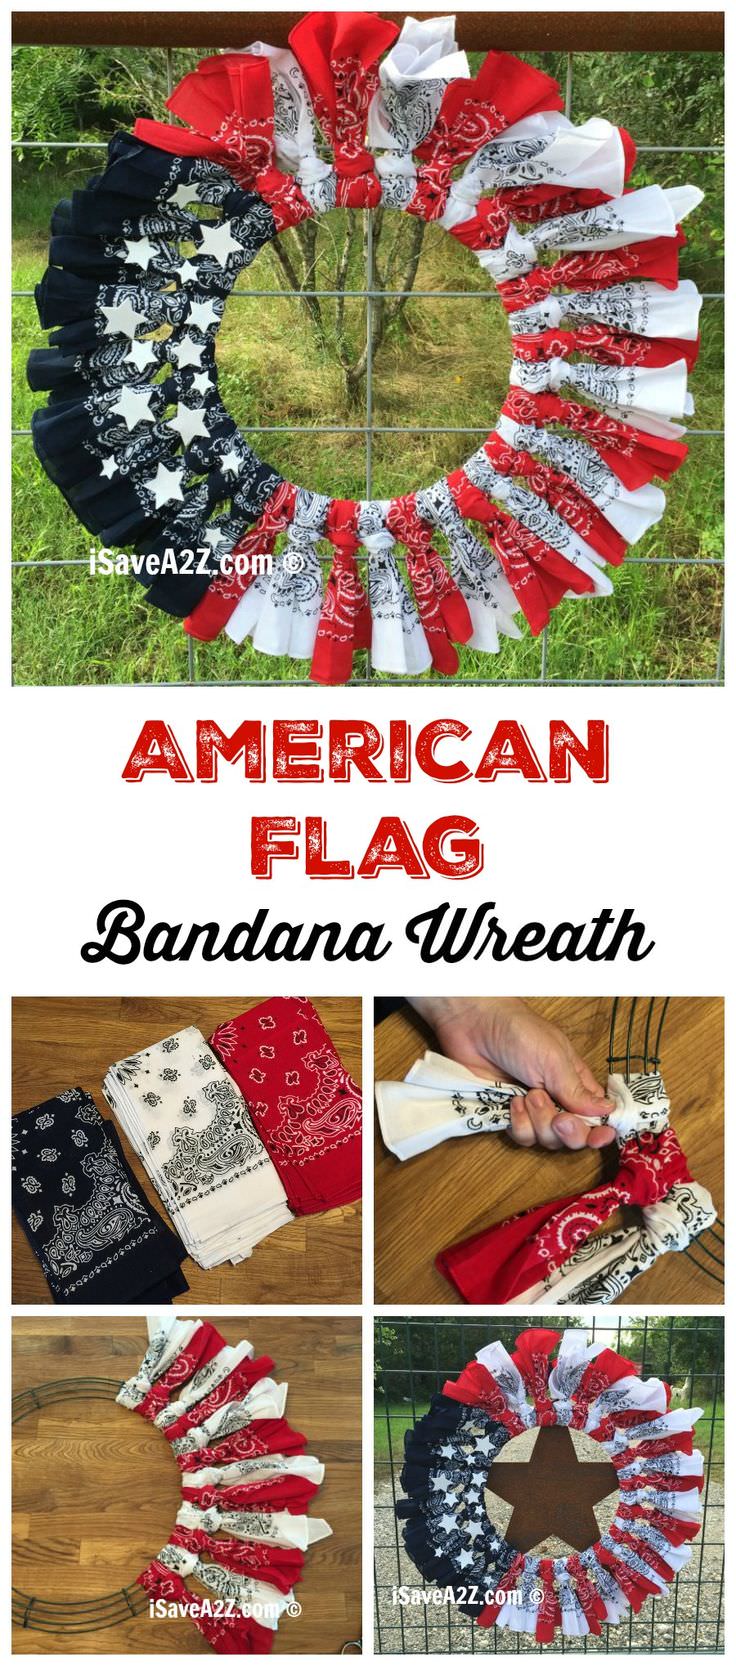 Show off your American spirit with this great bandana wreath. Check out to learn more about red, white and blue bandana flag wreath craft idea.